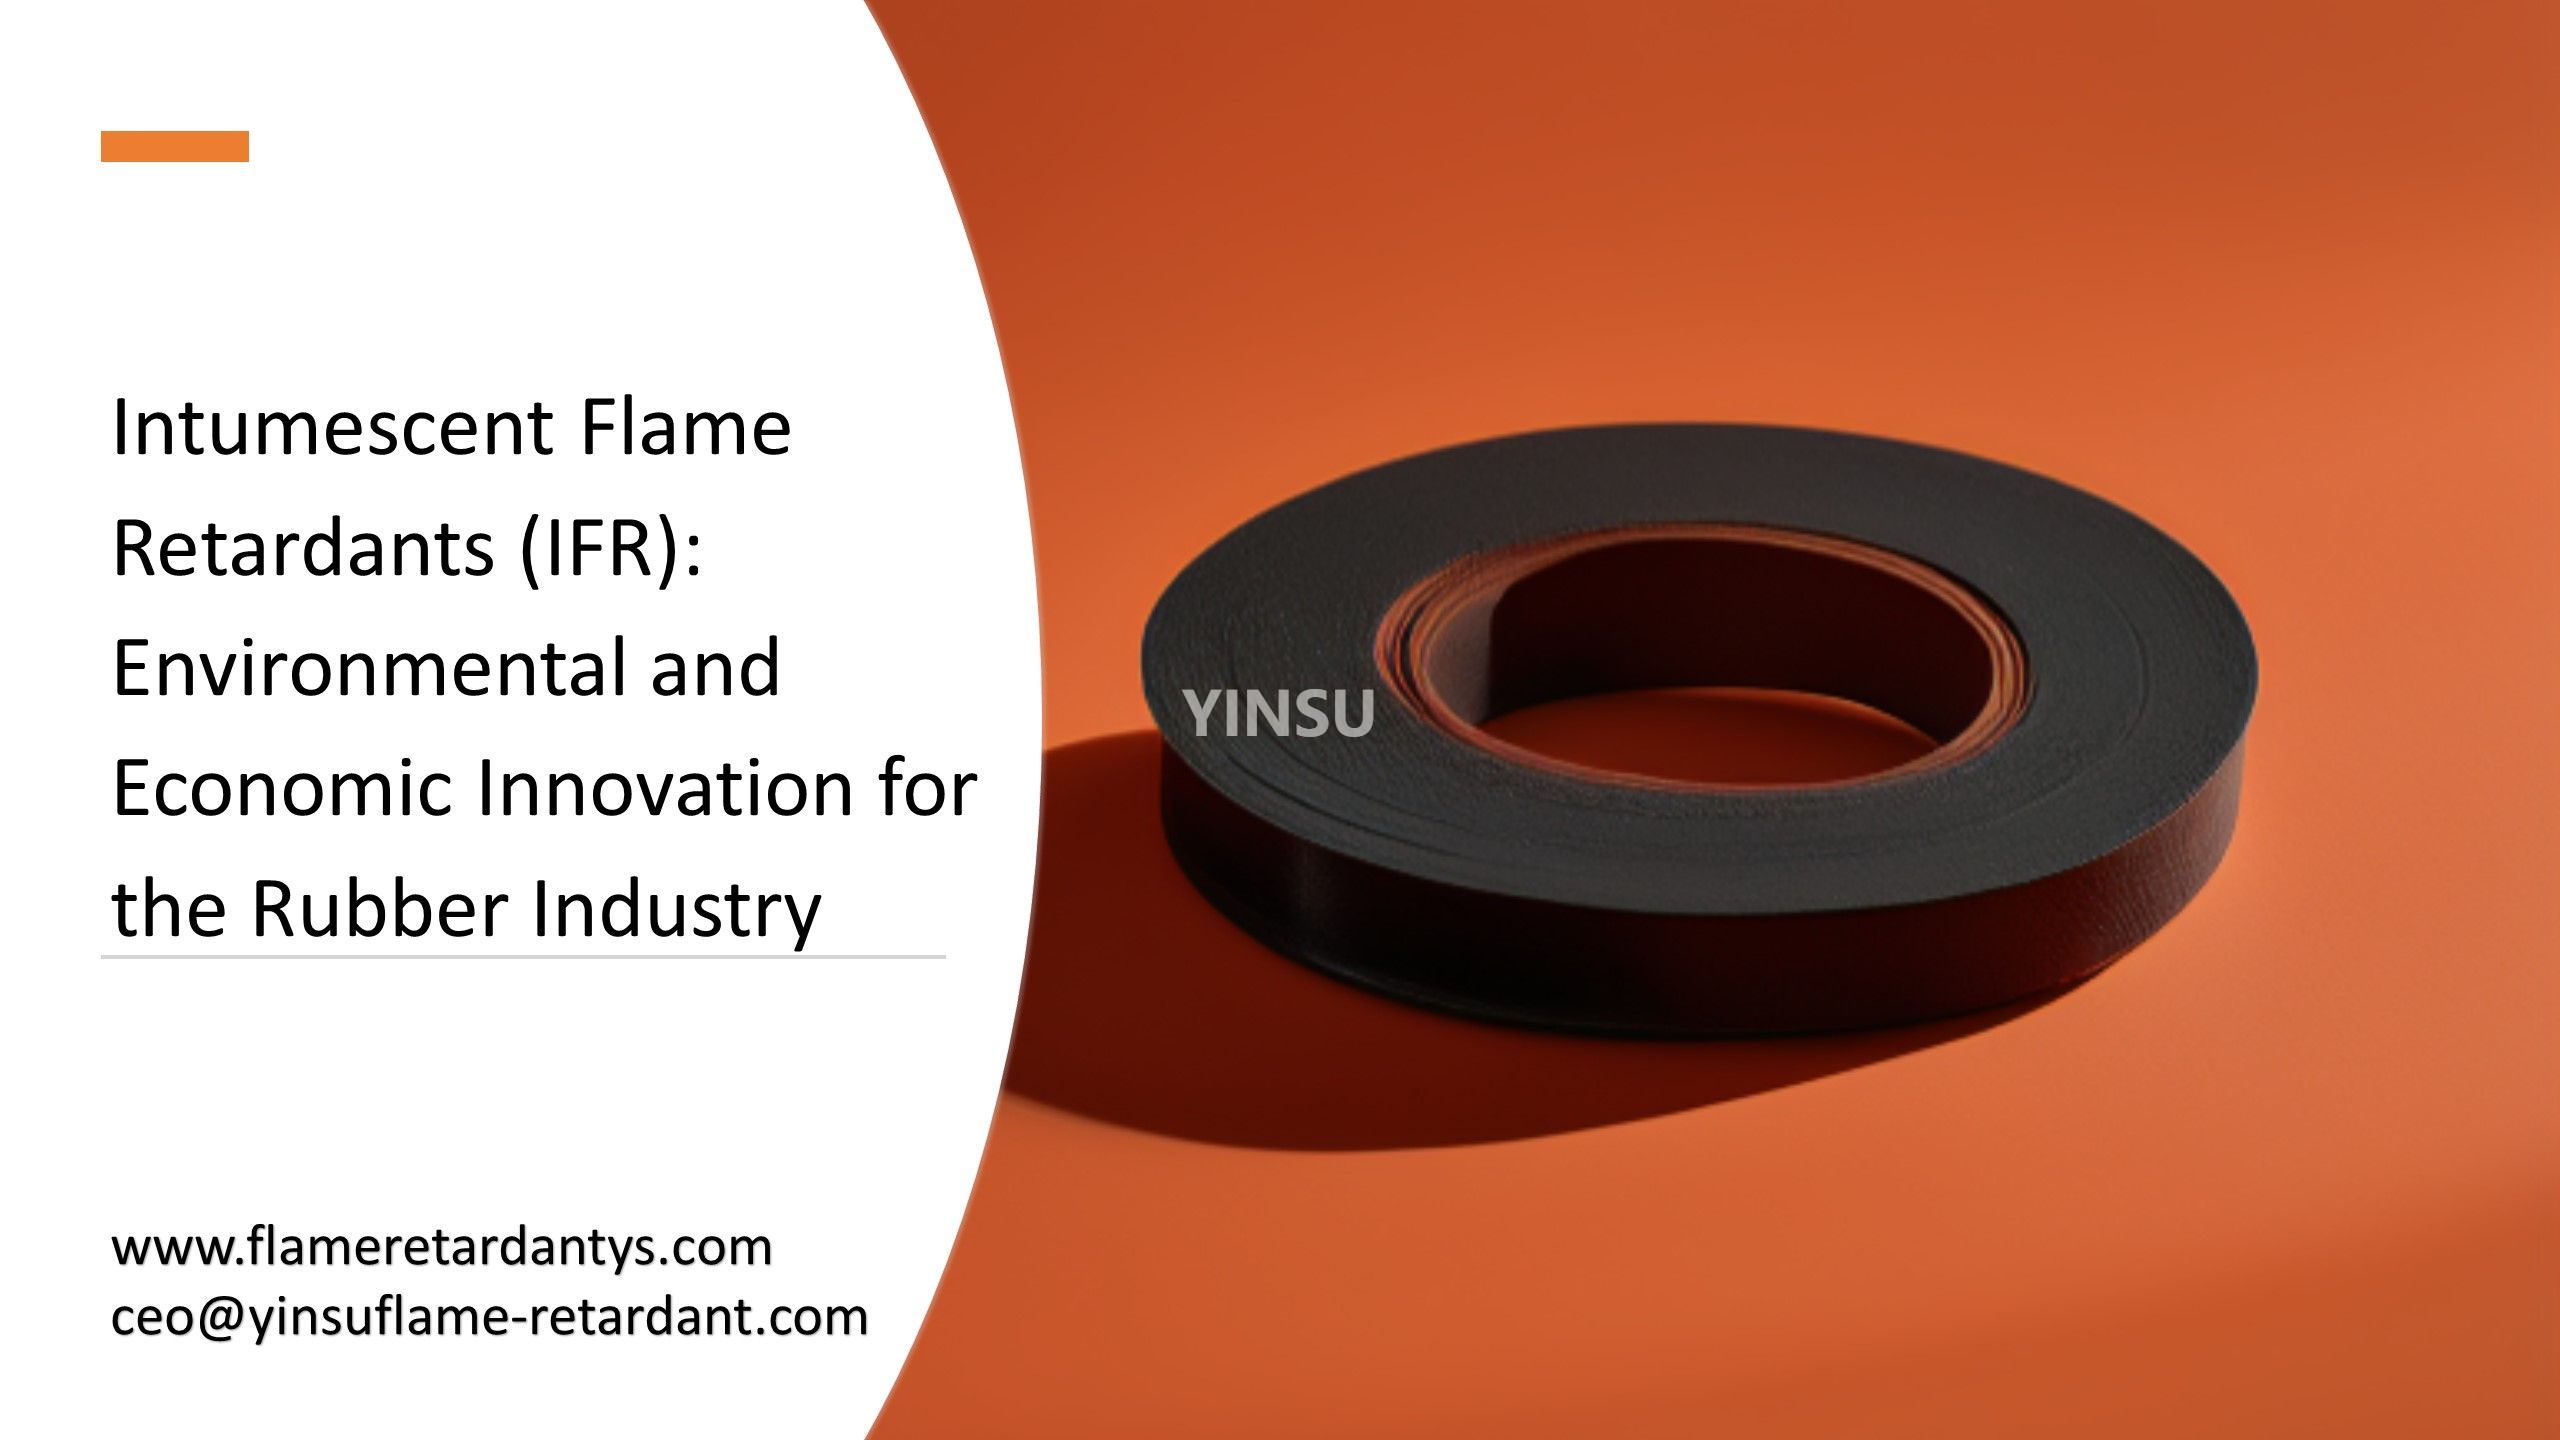 Intumescent Flame Retardants (IFR) Environmental and Economic Innovation for the Rubber Industry